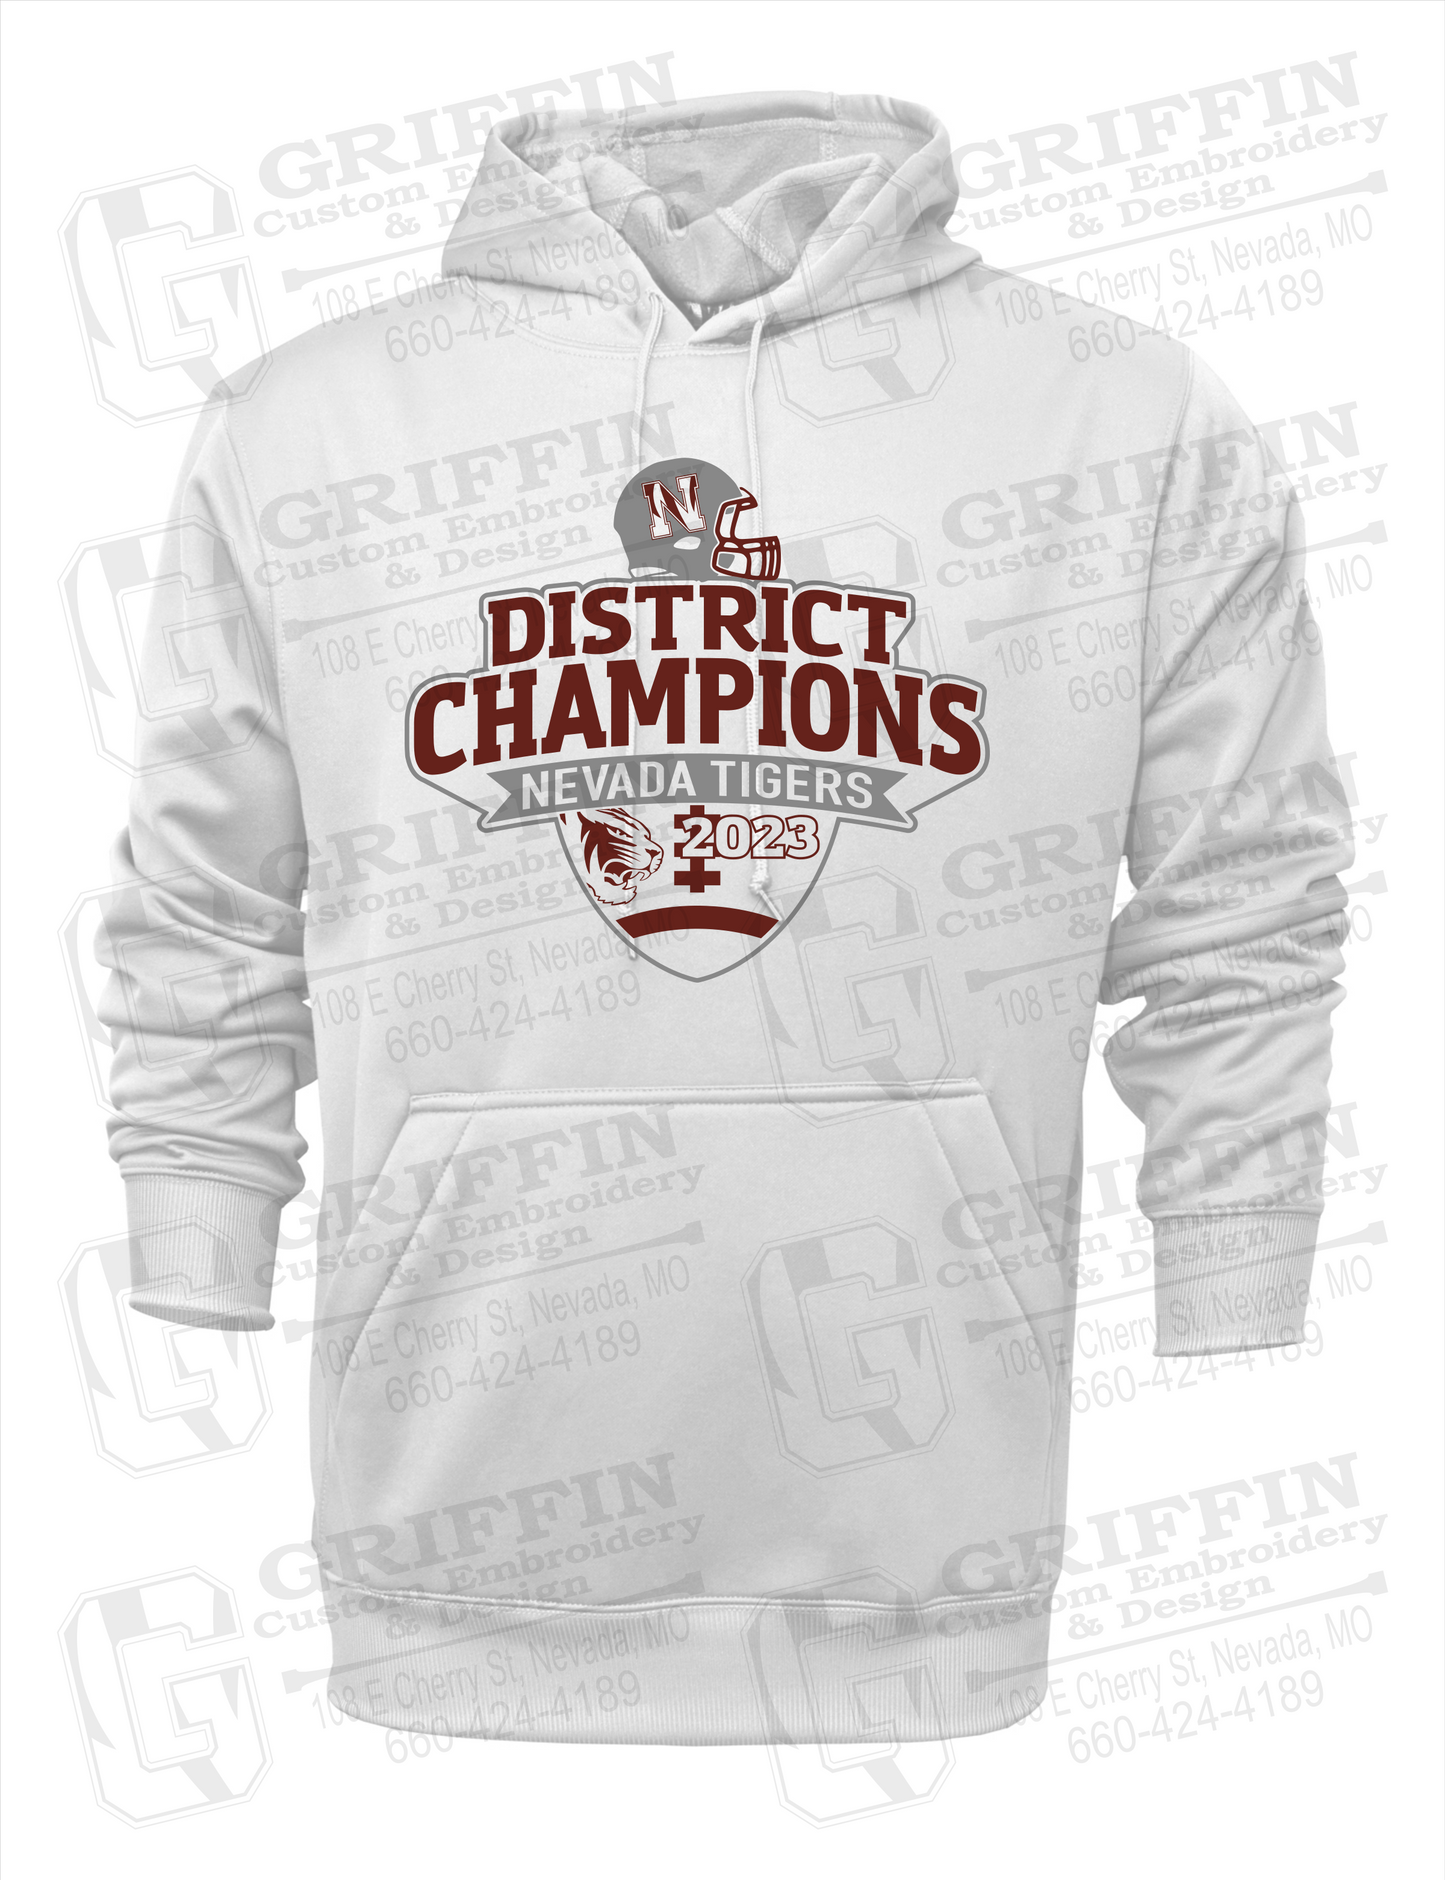 Nevada Tigers 24-L Youth Hoodie - Football 2023 District Champions